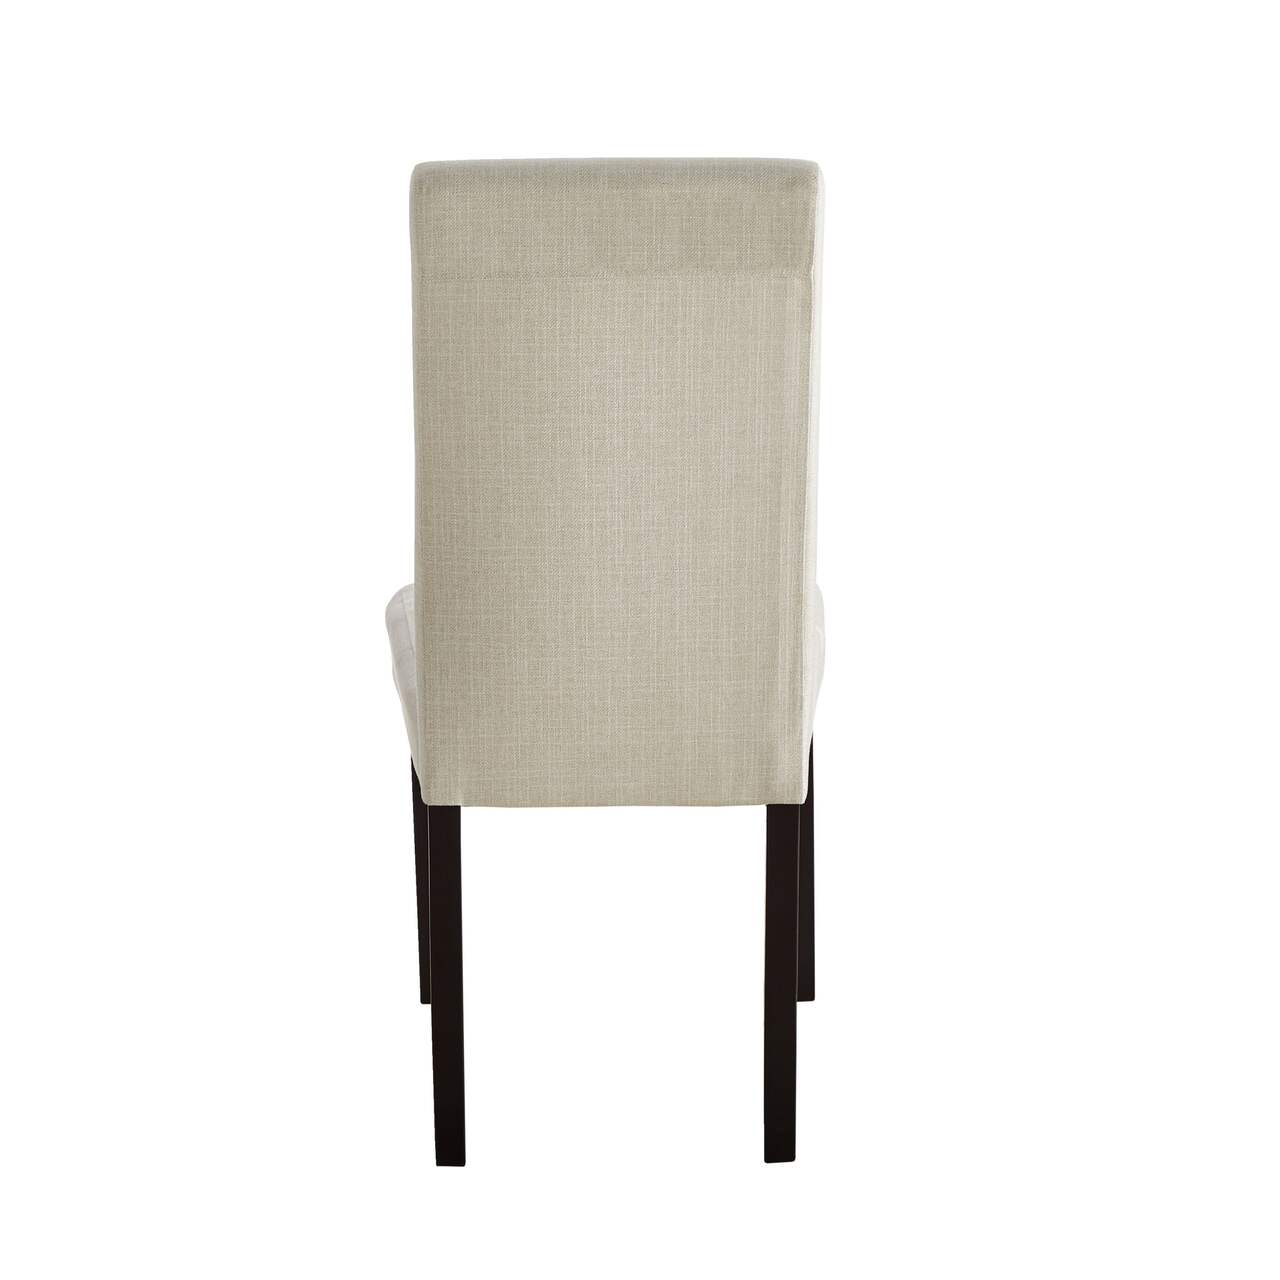 CANVAS Cornwall Dining Chair, Ivory